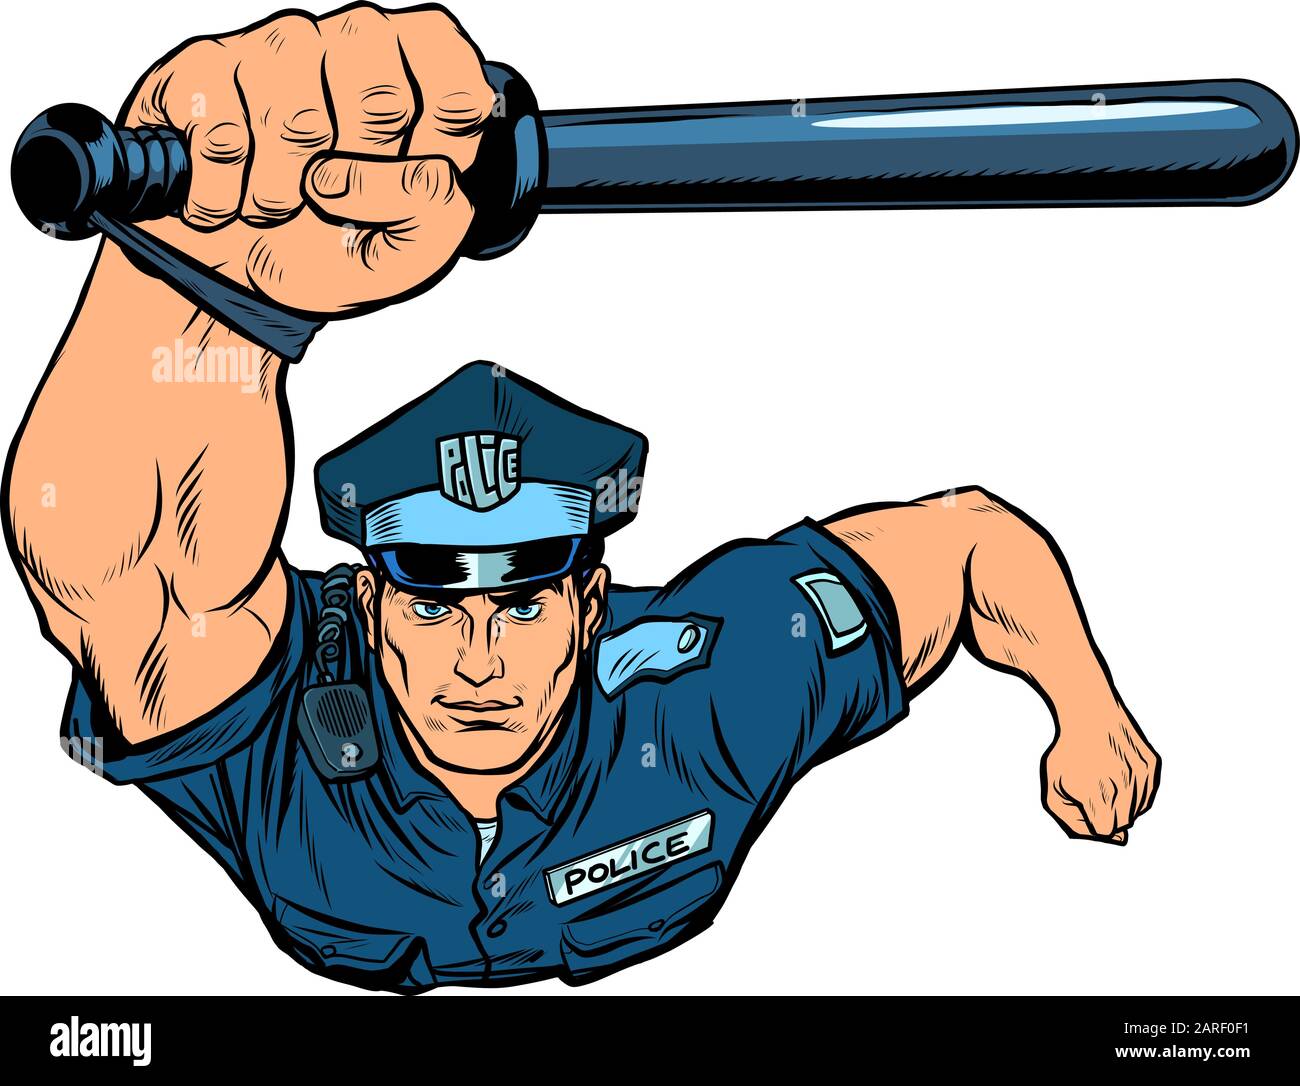 Police officer with a baton Stock Vector